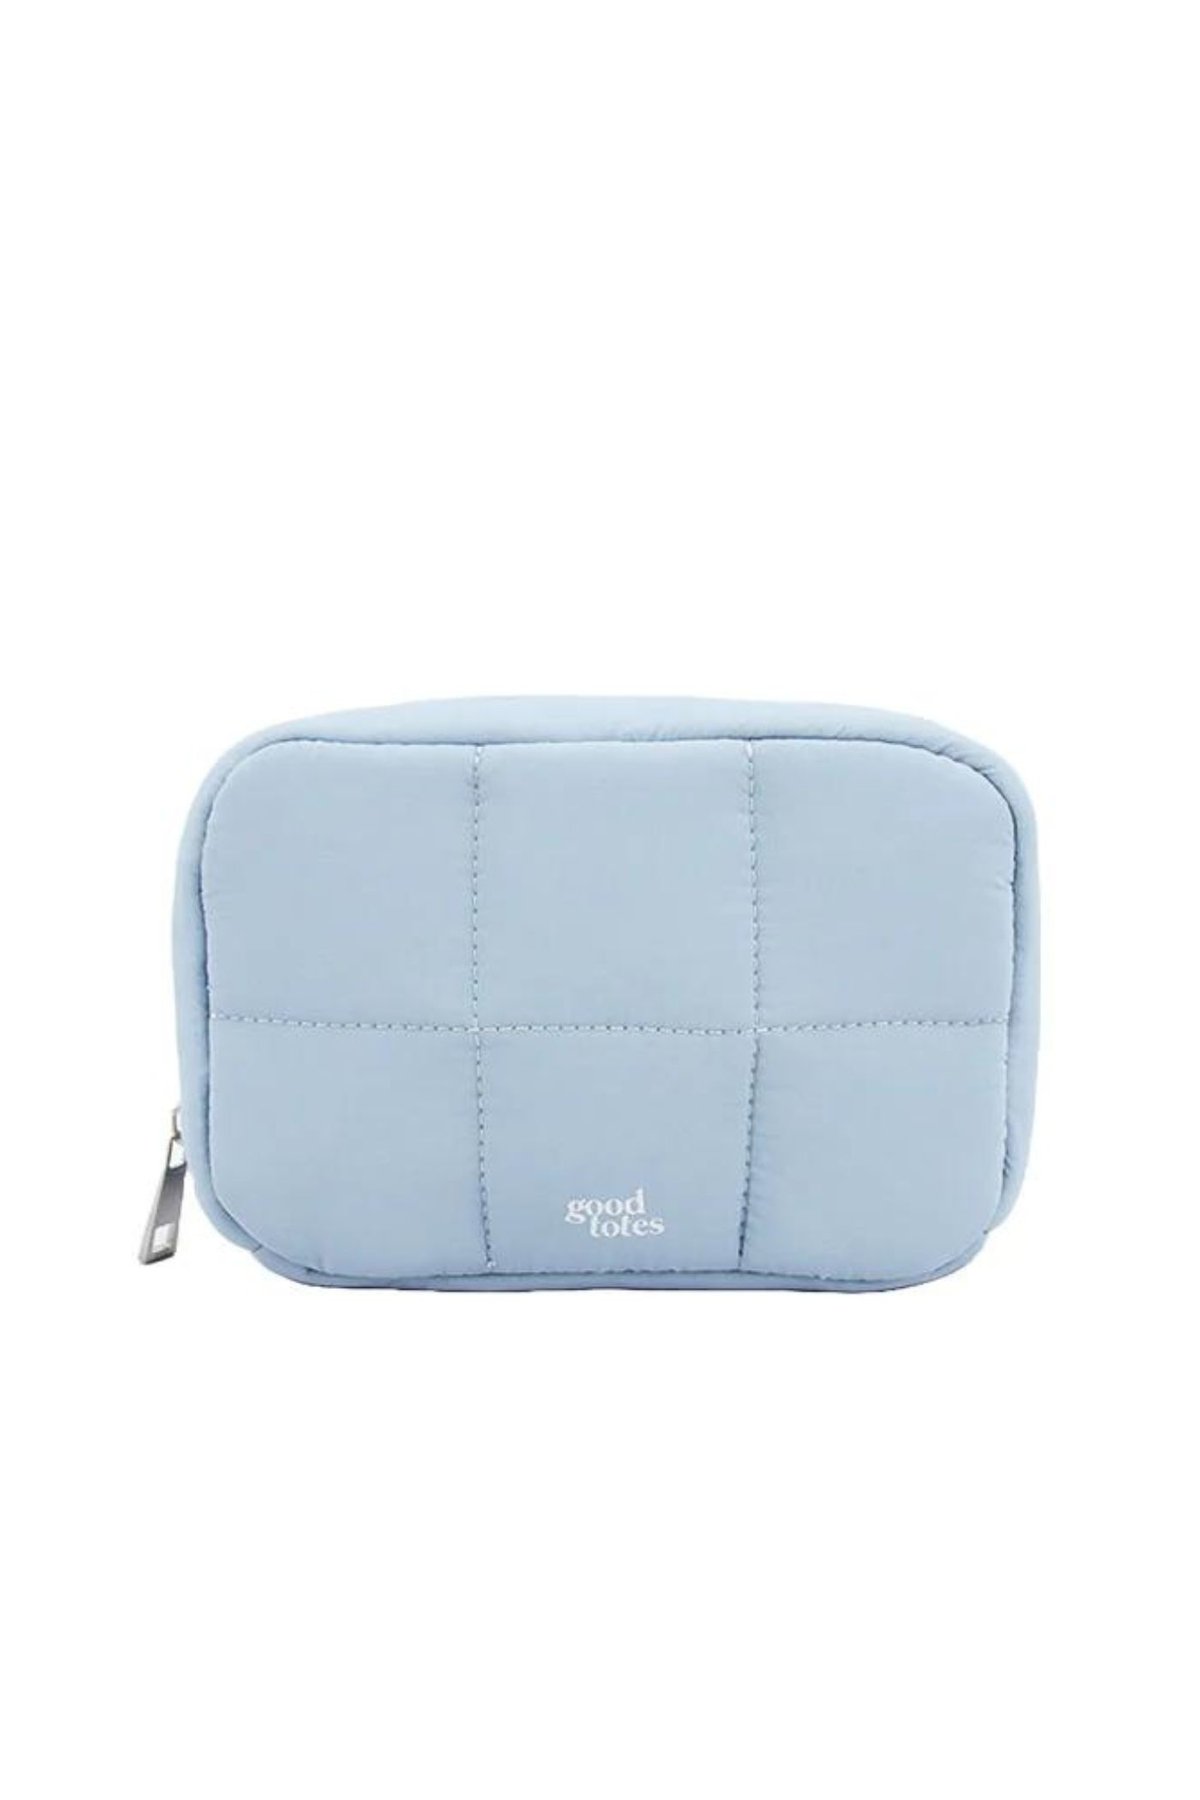 Good Totes (Bread Puffer Pouch - Blueberry)